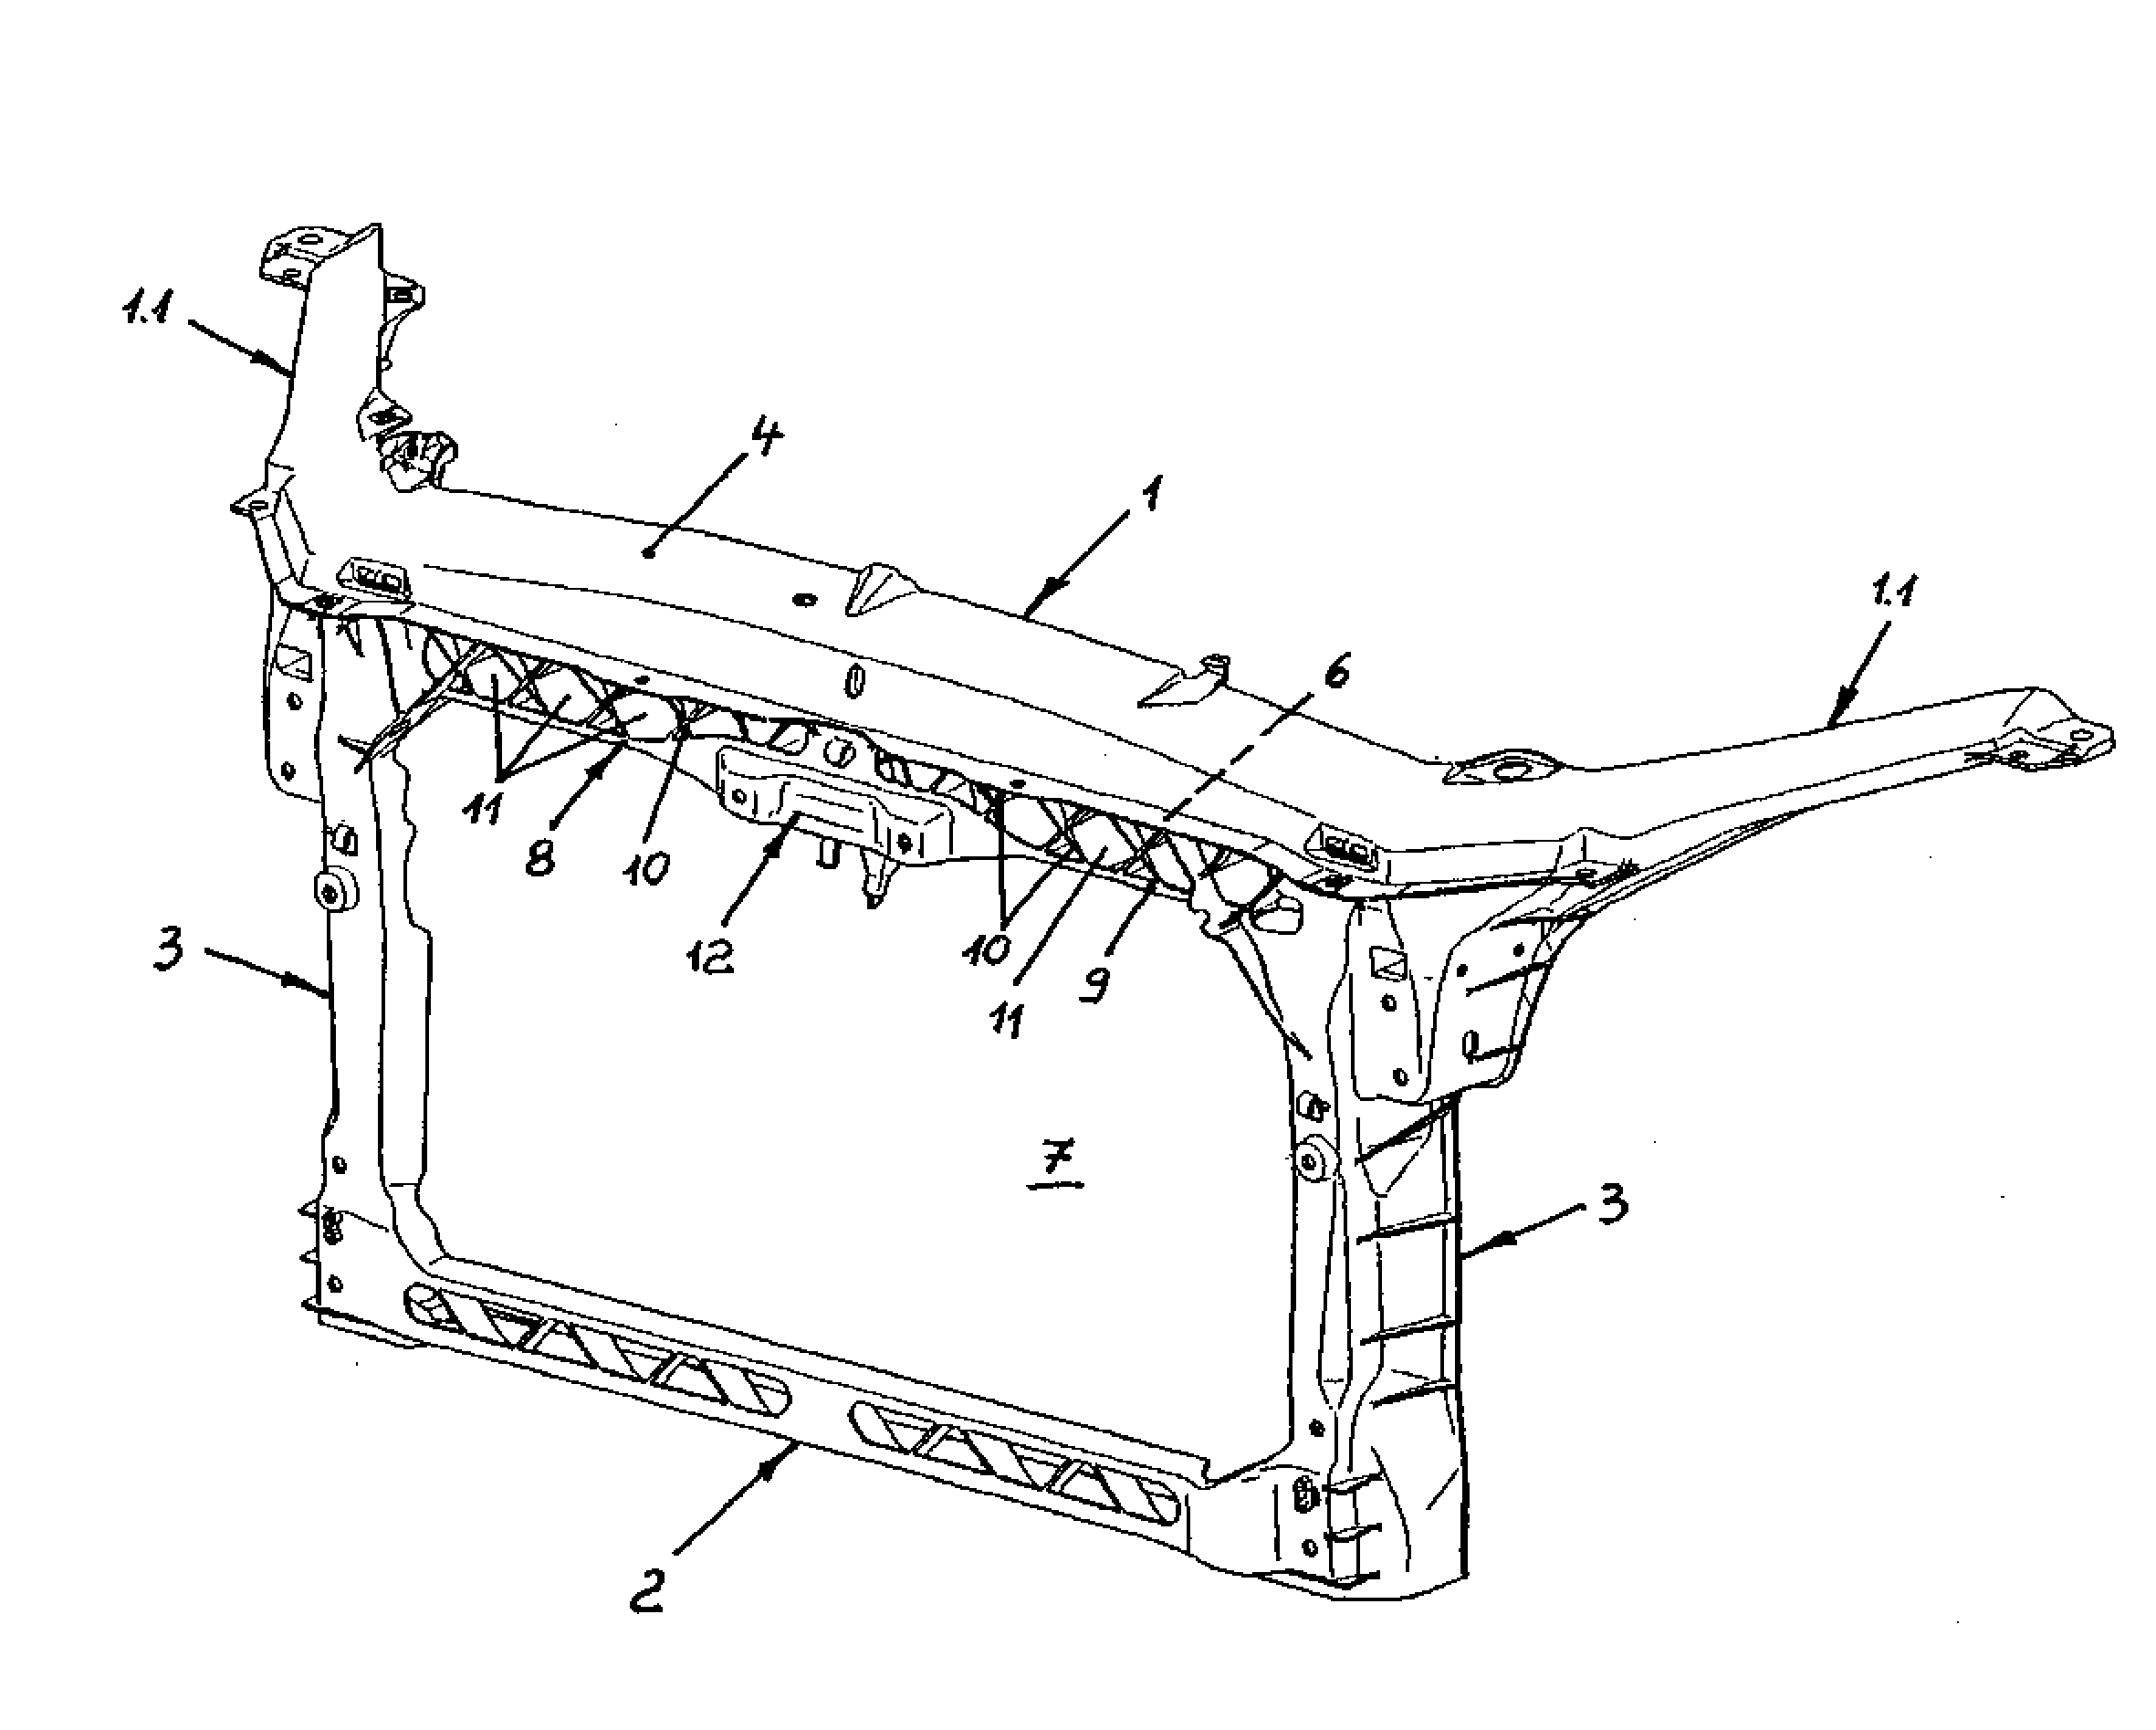 Mounting Structure With a Frame-Shaped Construction